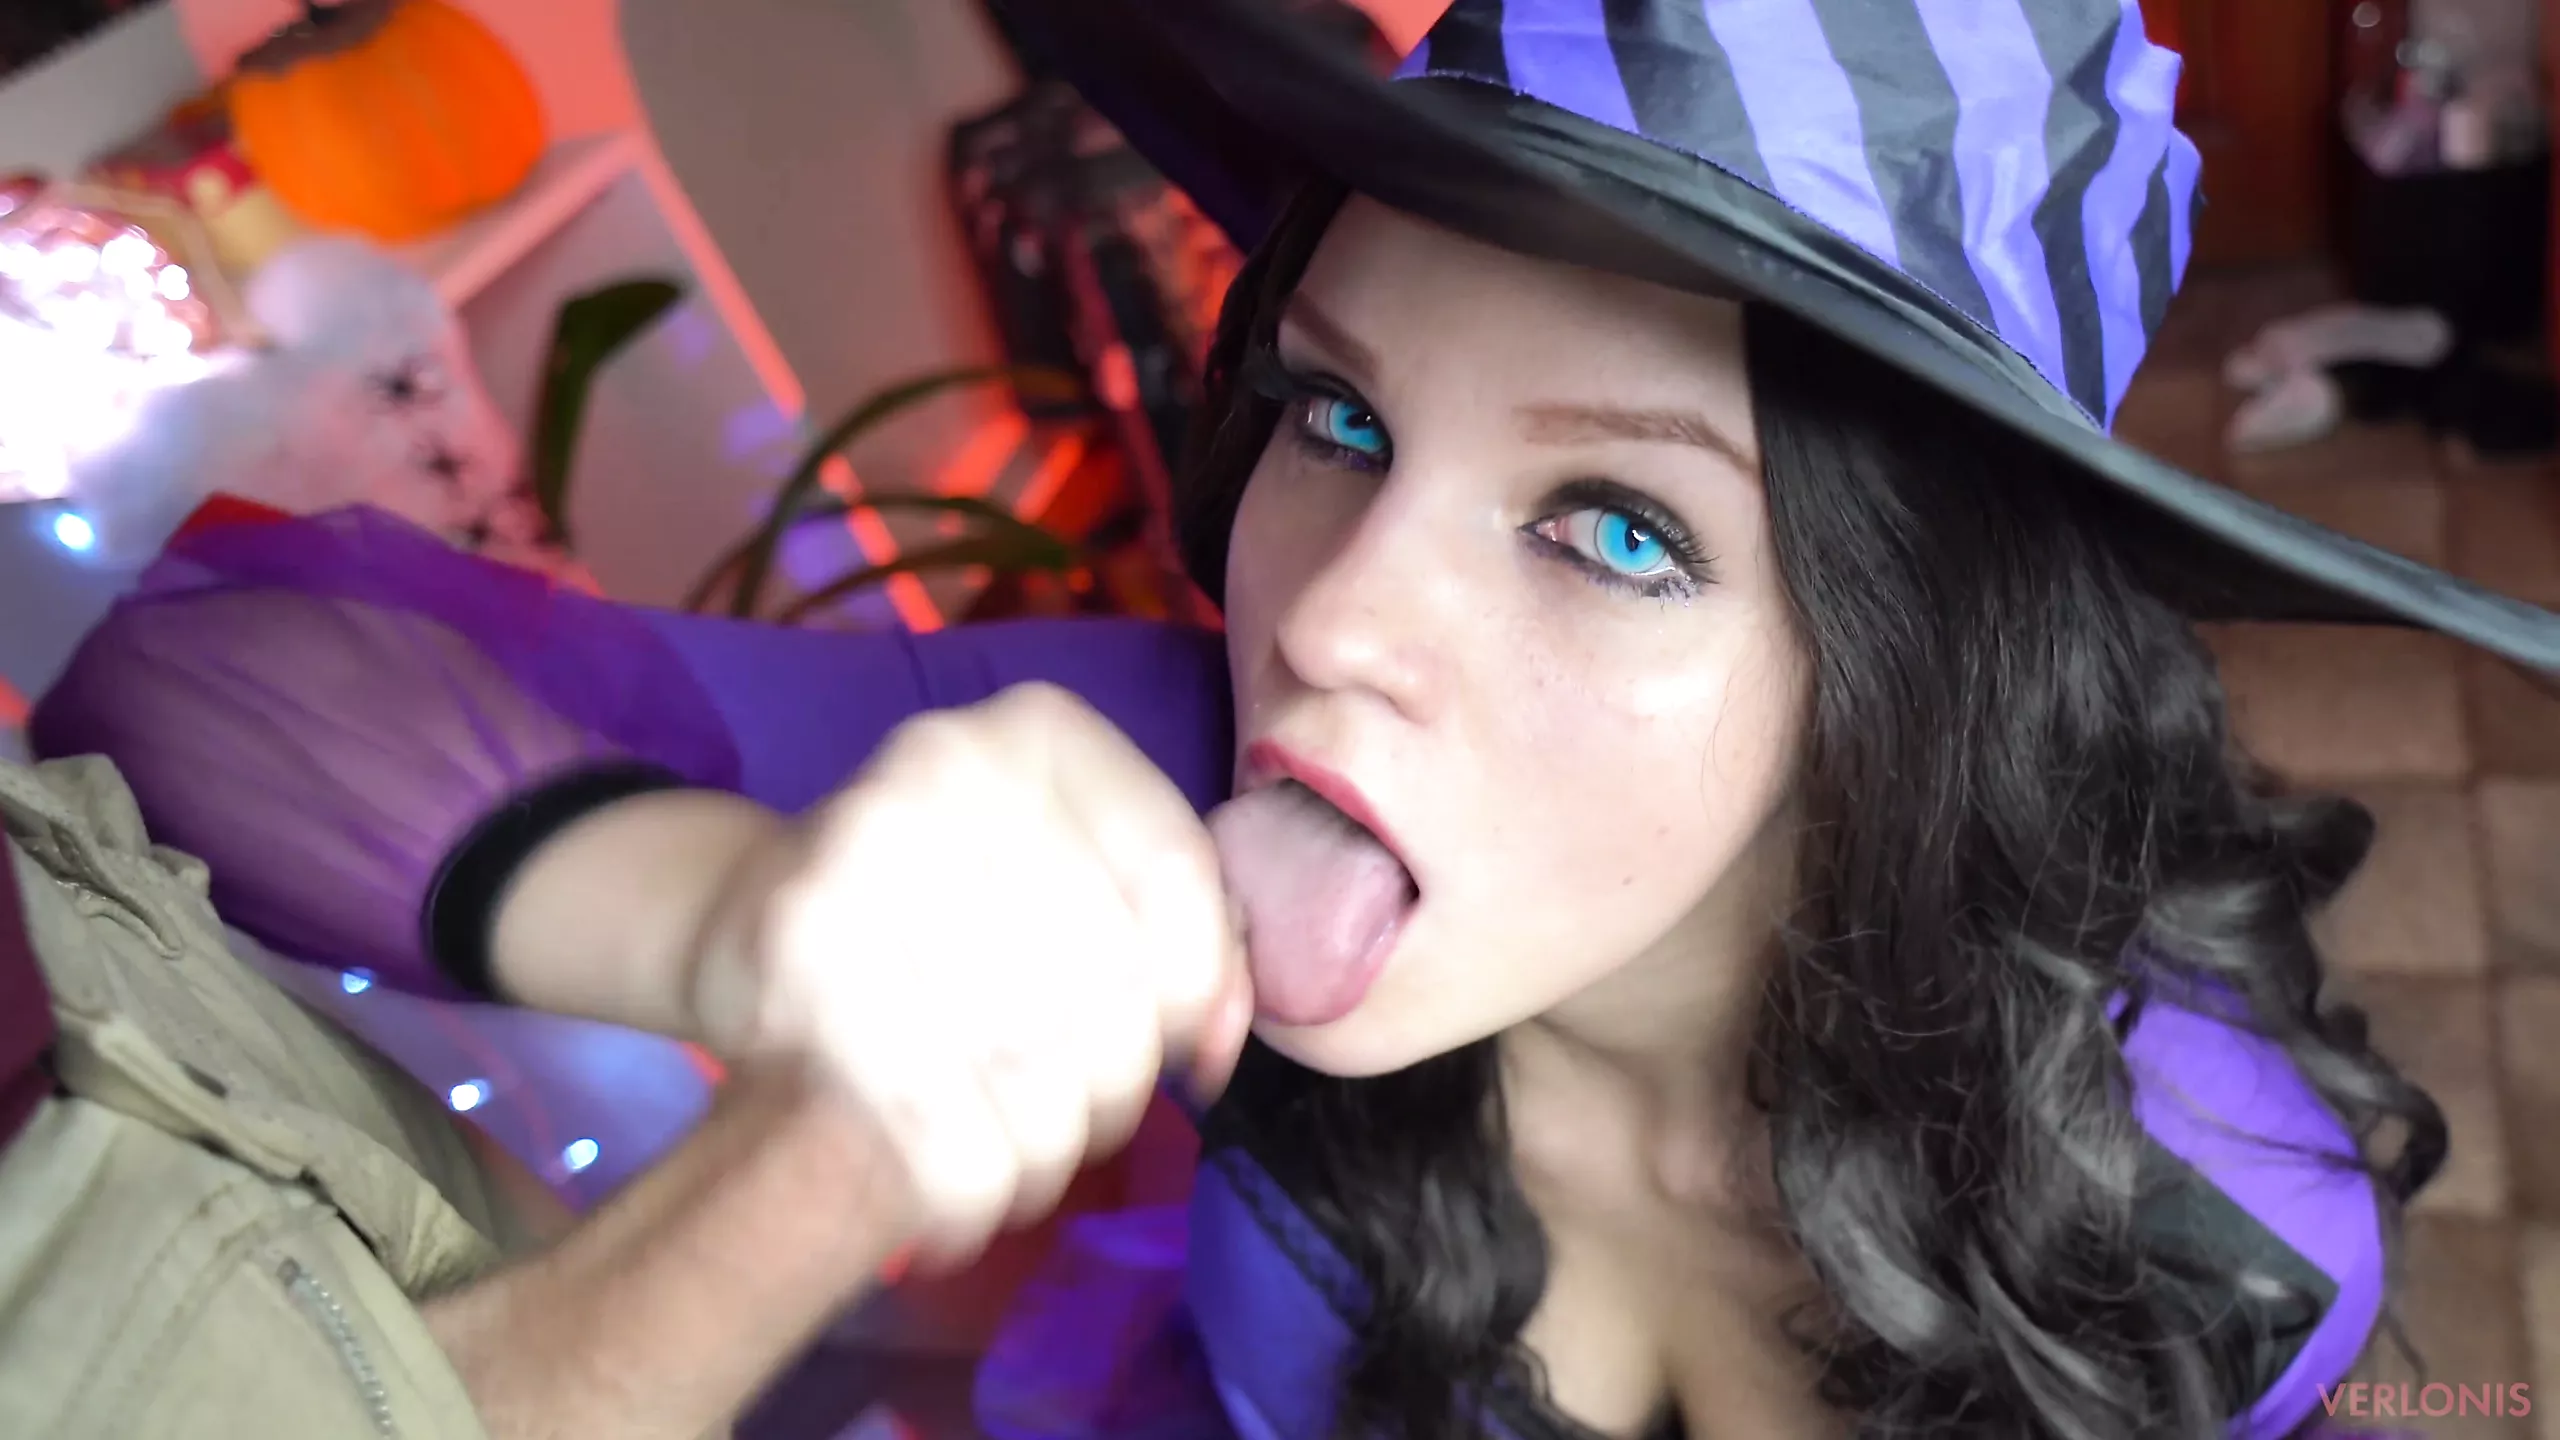 naughty halloween amateur posts shots Sex Images Hq